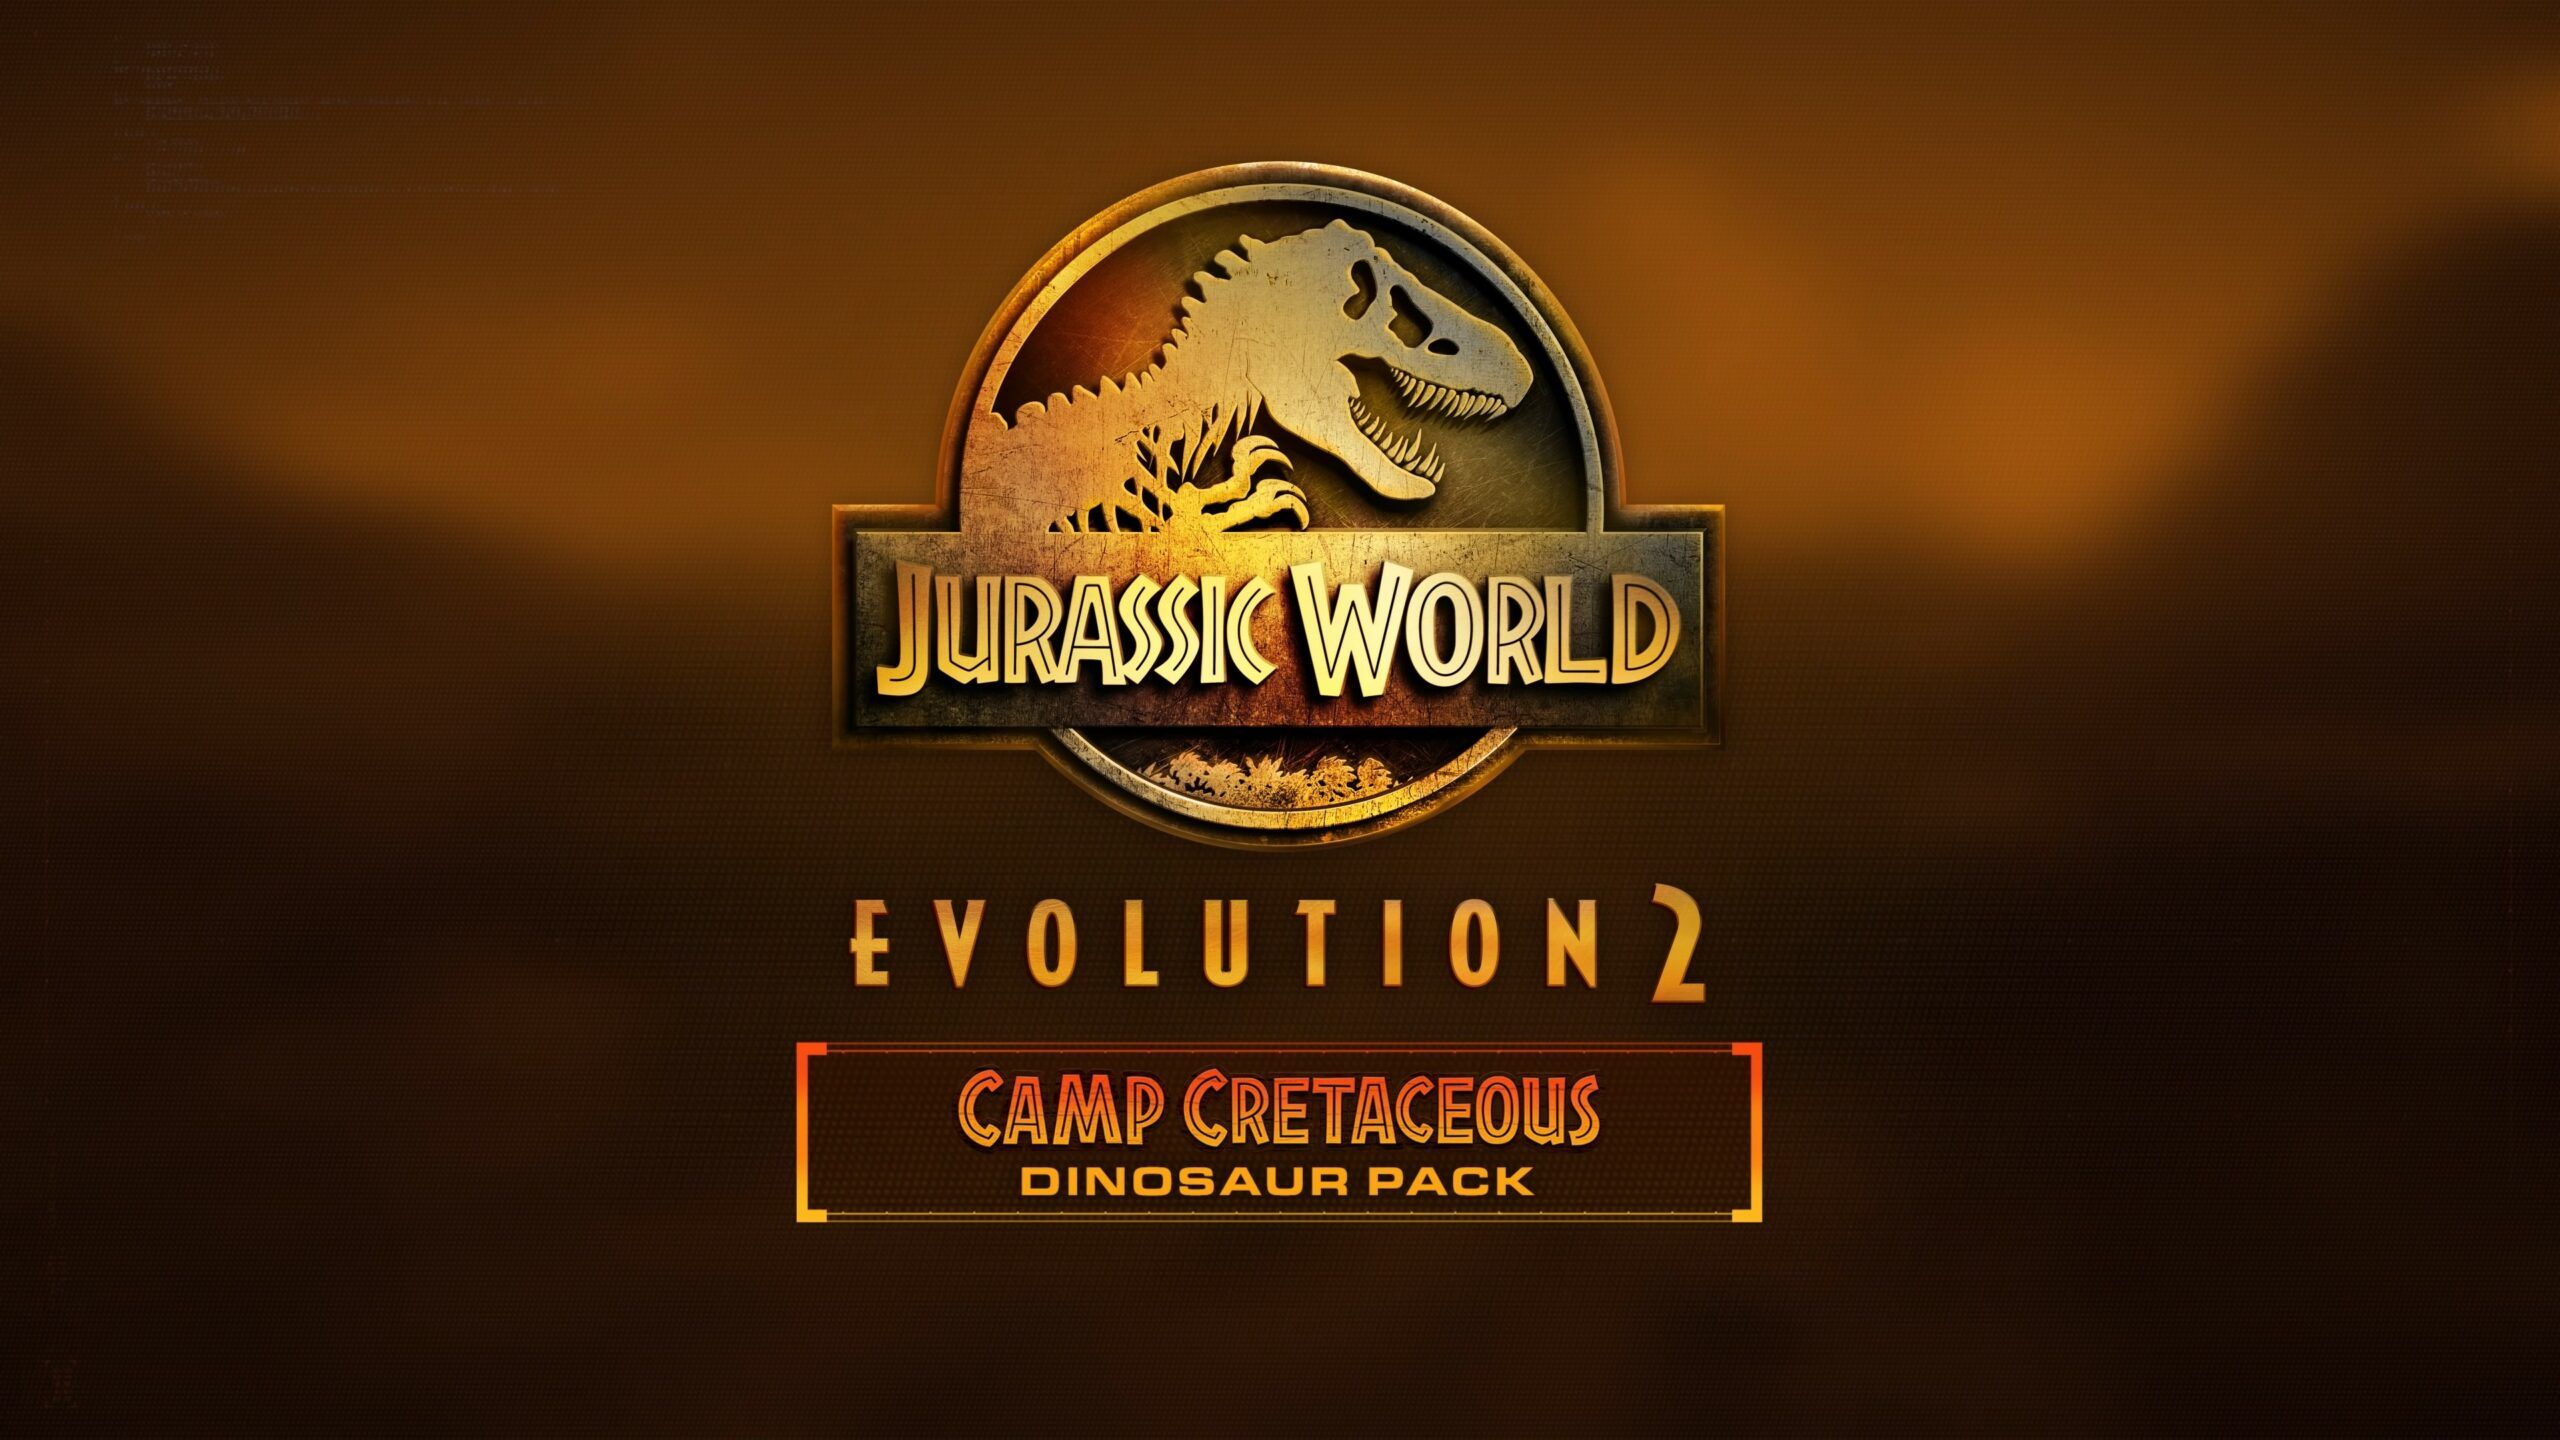 Jurassic World Evolution 2 Camp Cretaceous DLC Release Time, Date, and